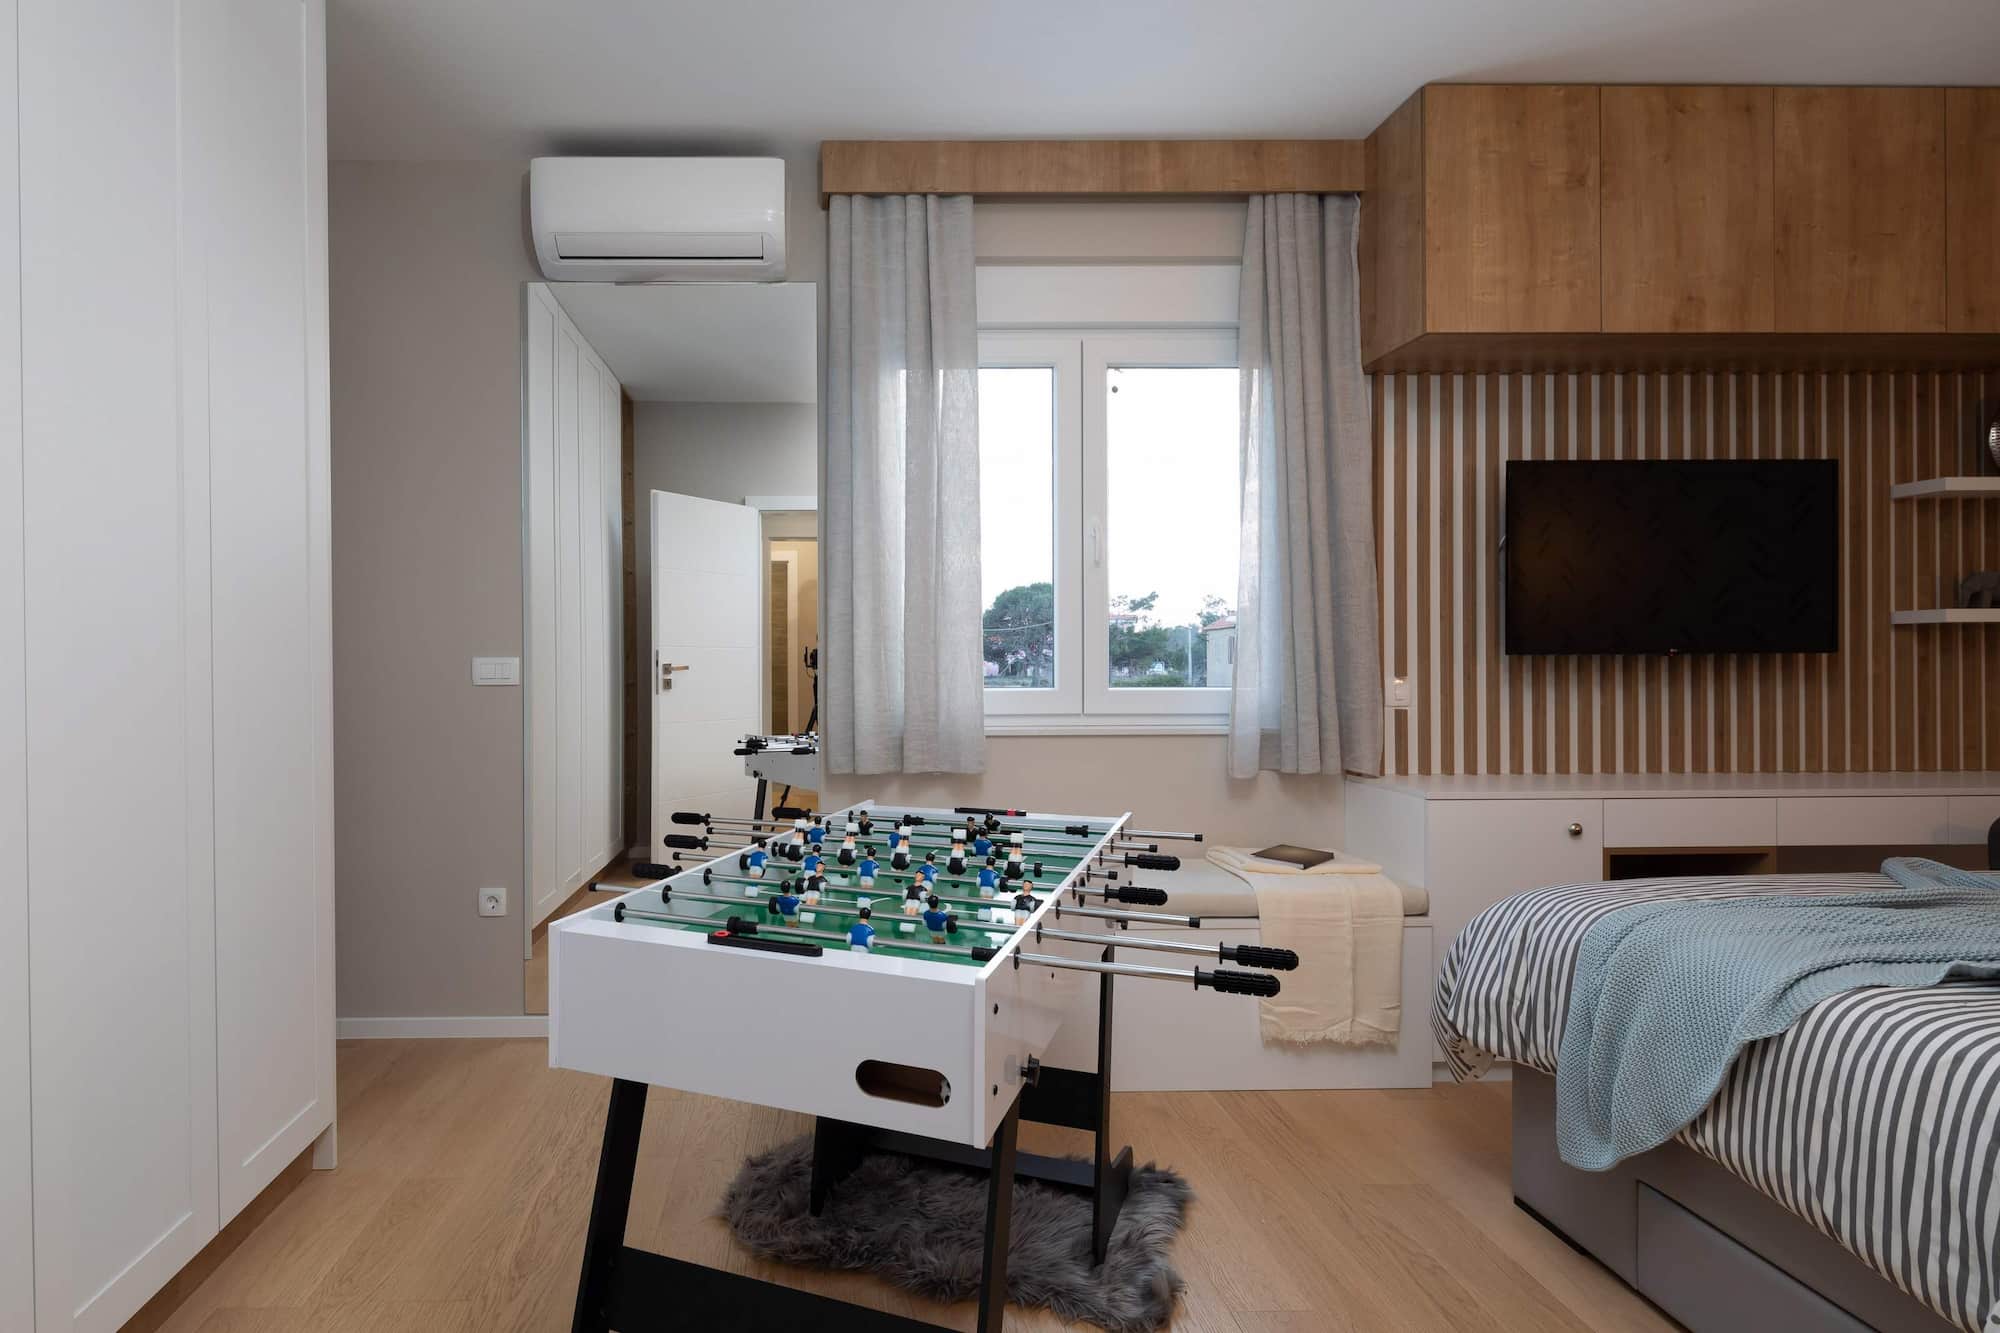 Holiday villa with pool in Croatia, table football in the bedroom